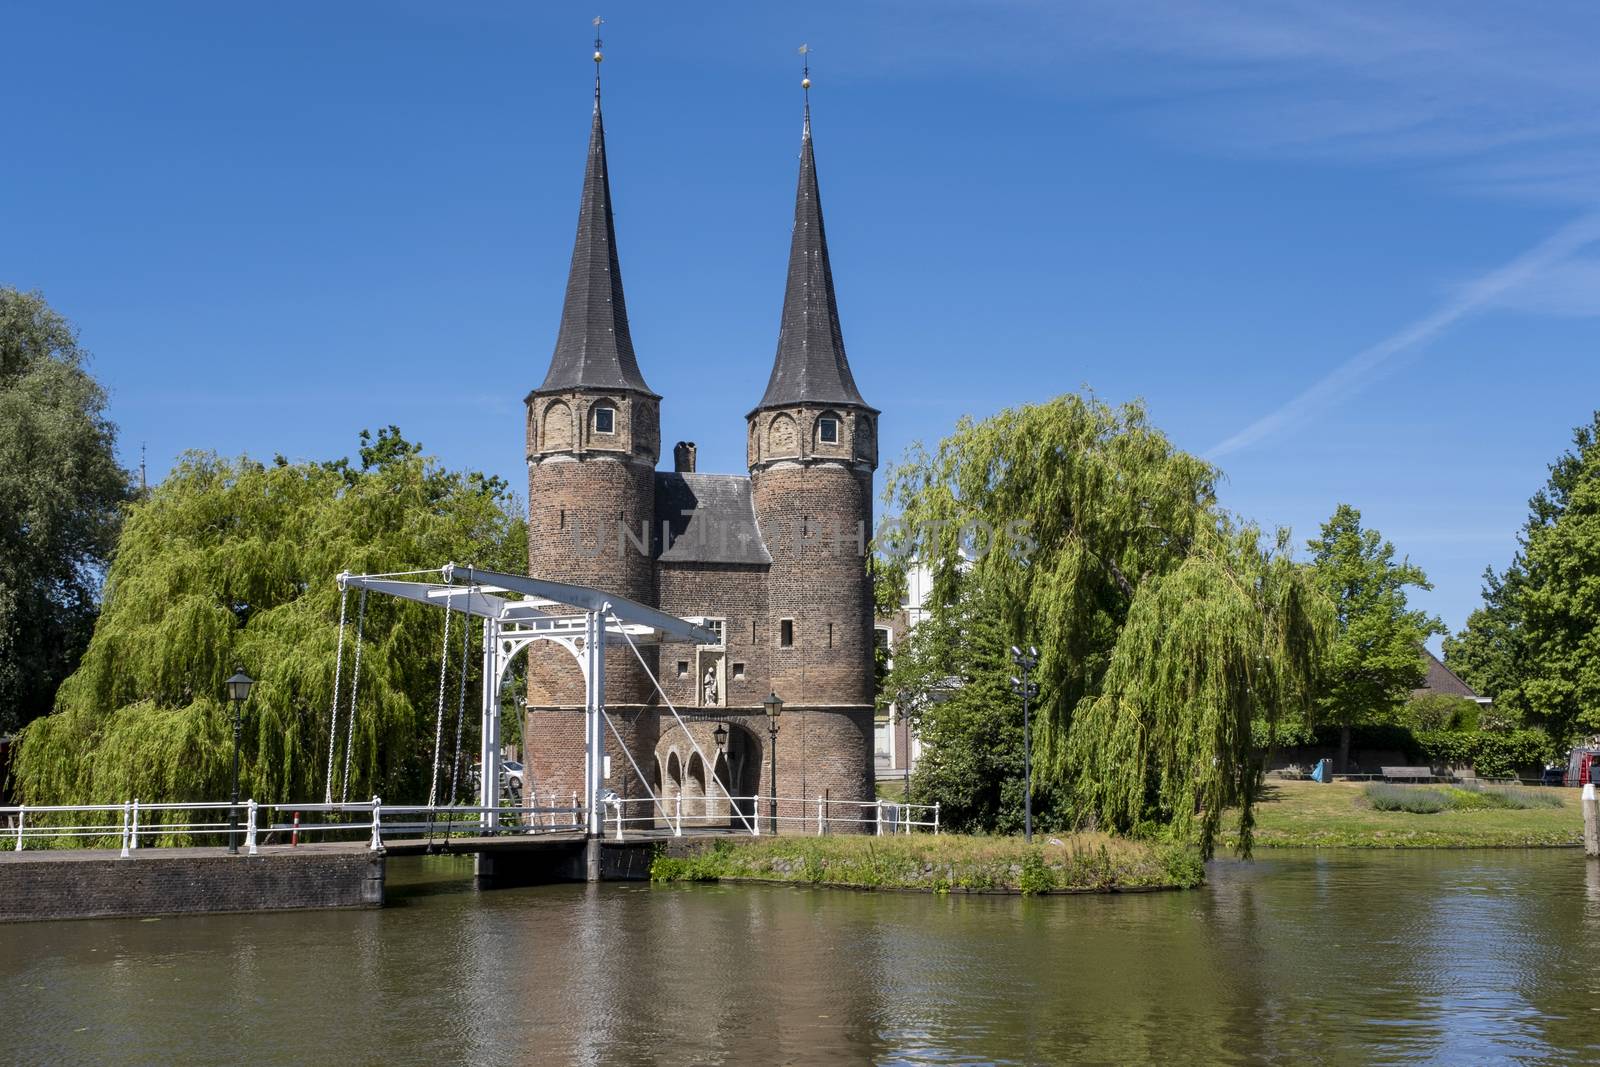 The Eastern Gate Oostpoort in Delft, an example of Brick Gothic northern European architecture, was built around 1400